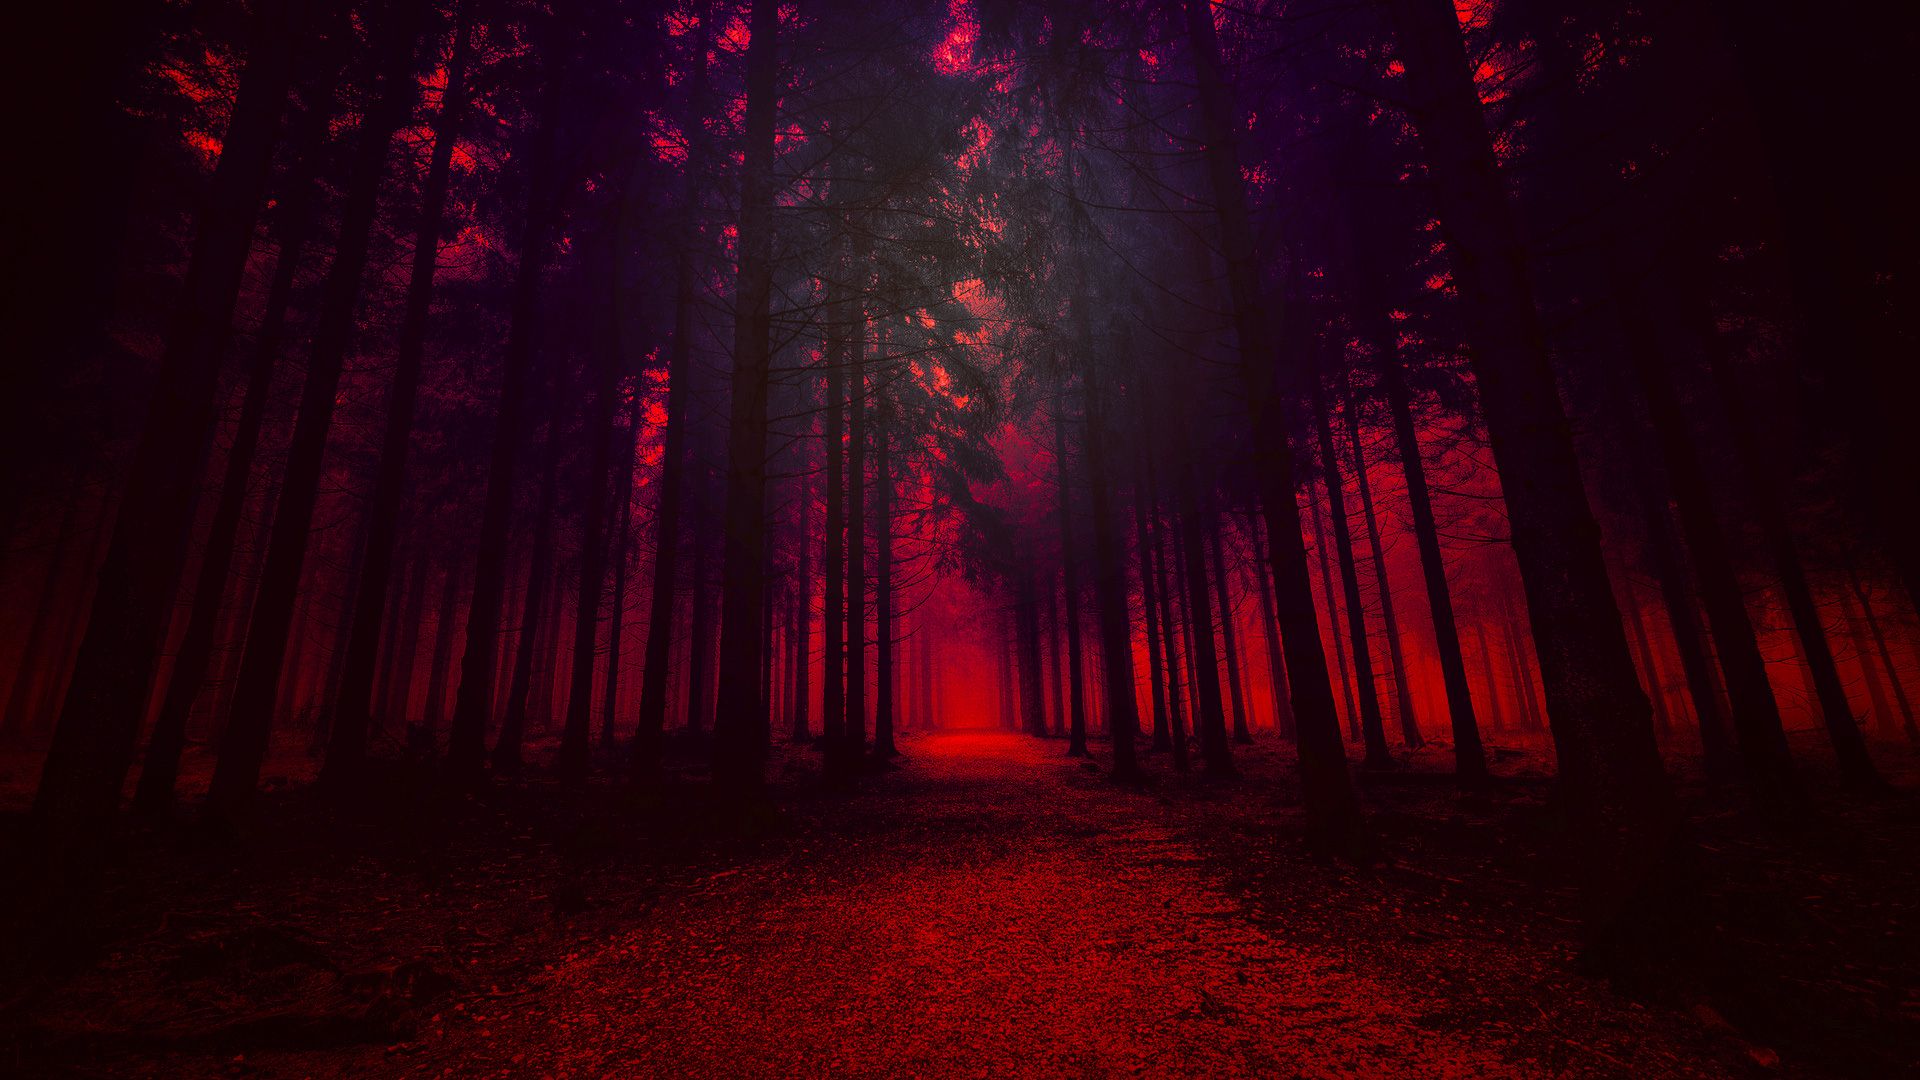 Artistic Red Forest, HD Nature, 4k Wallpaper, Image, Background